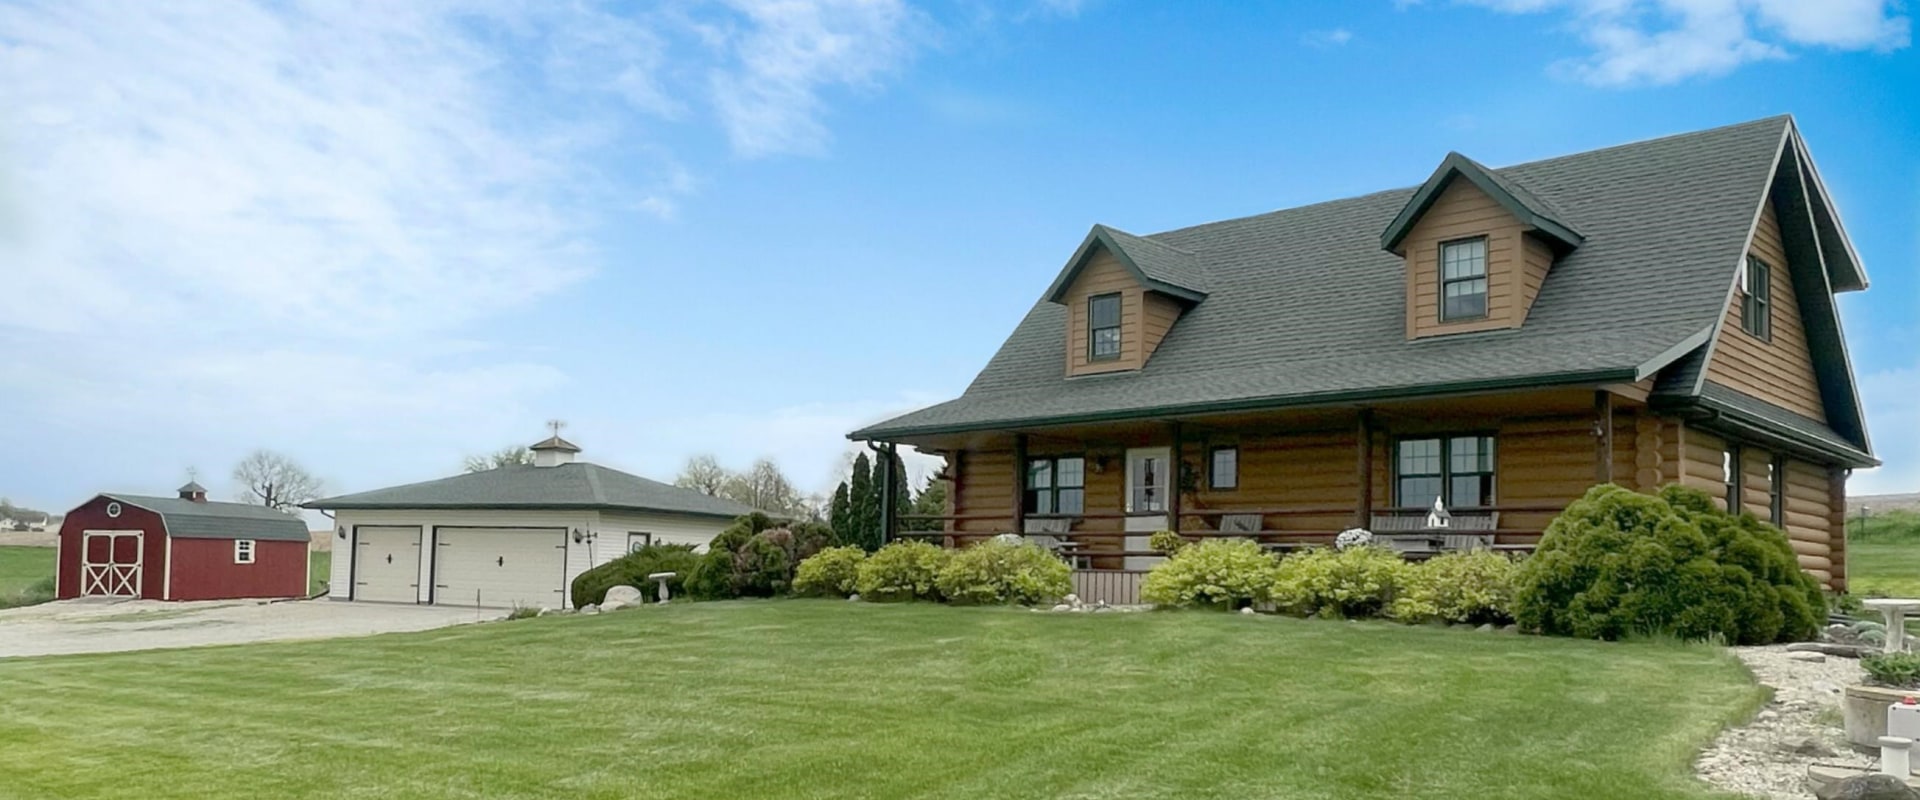 Wisconsin Home Prices: A Comprehensive Overview